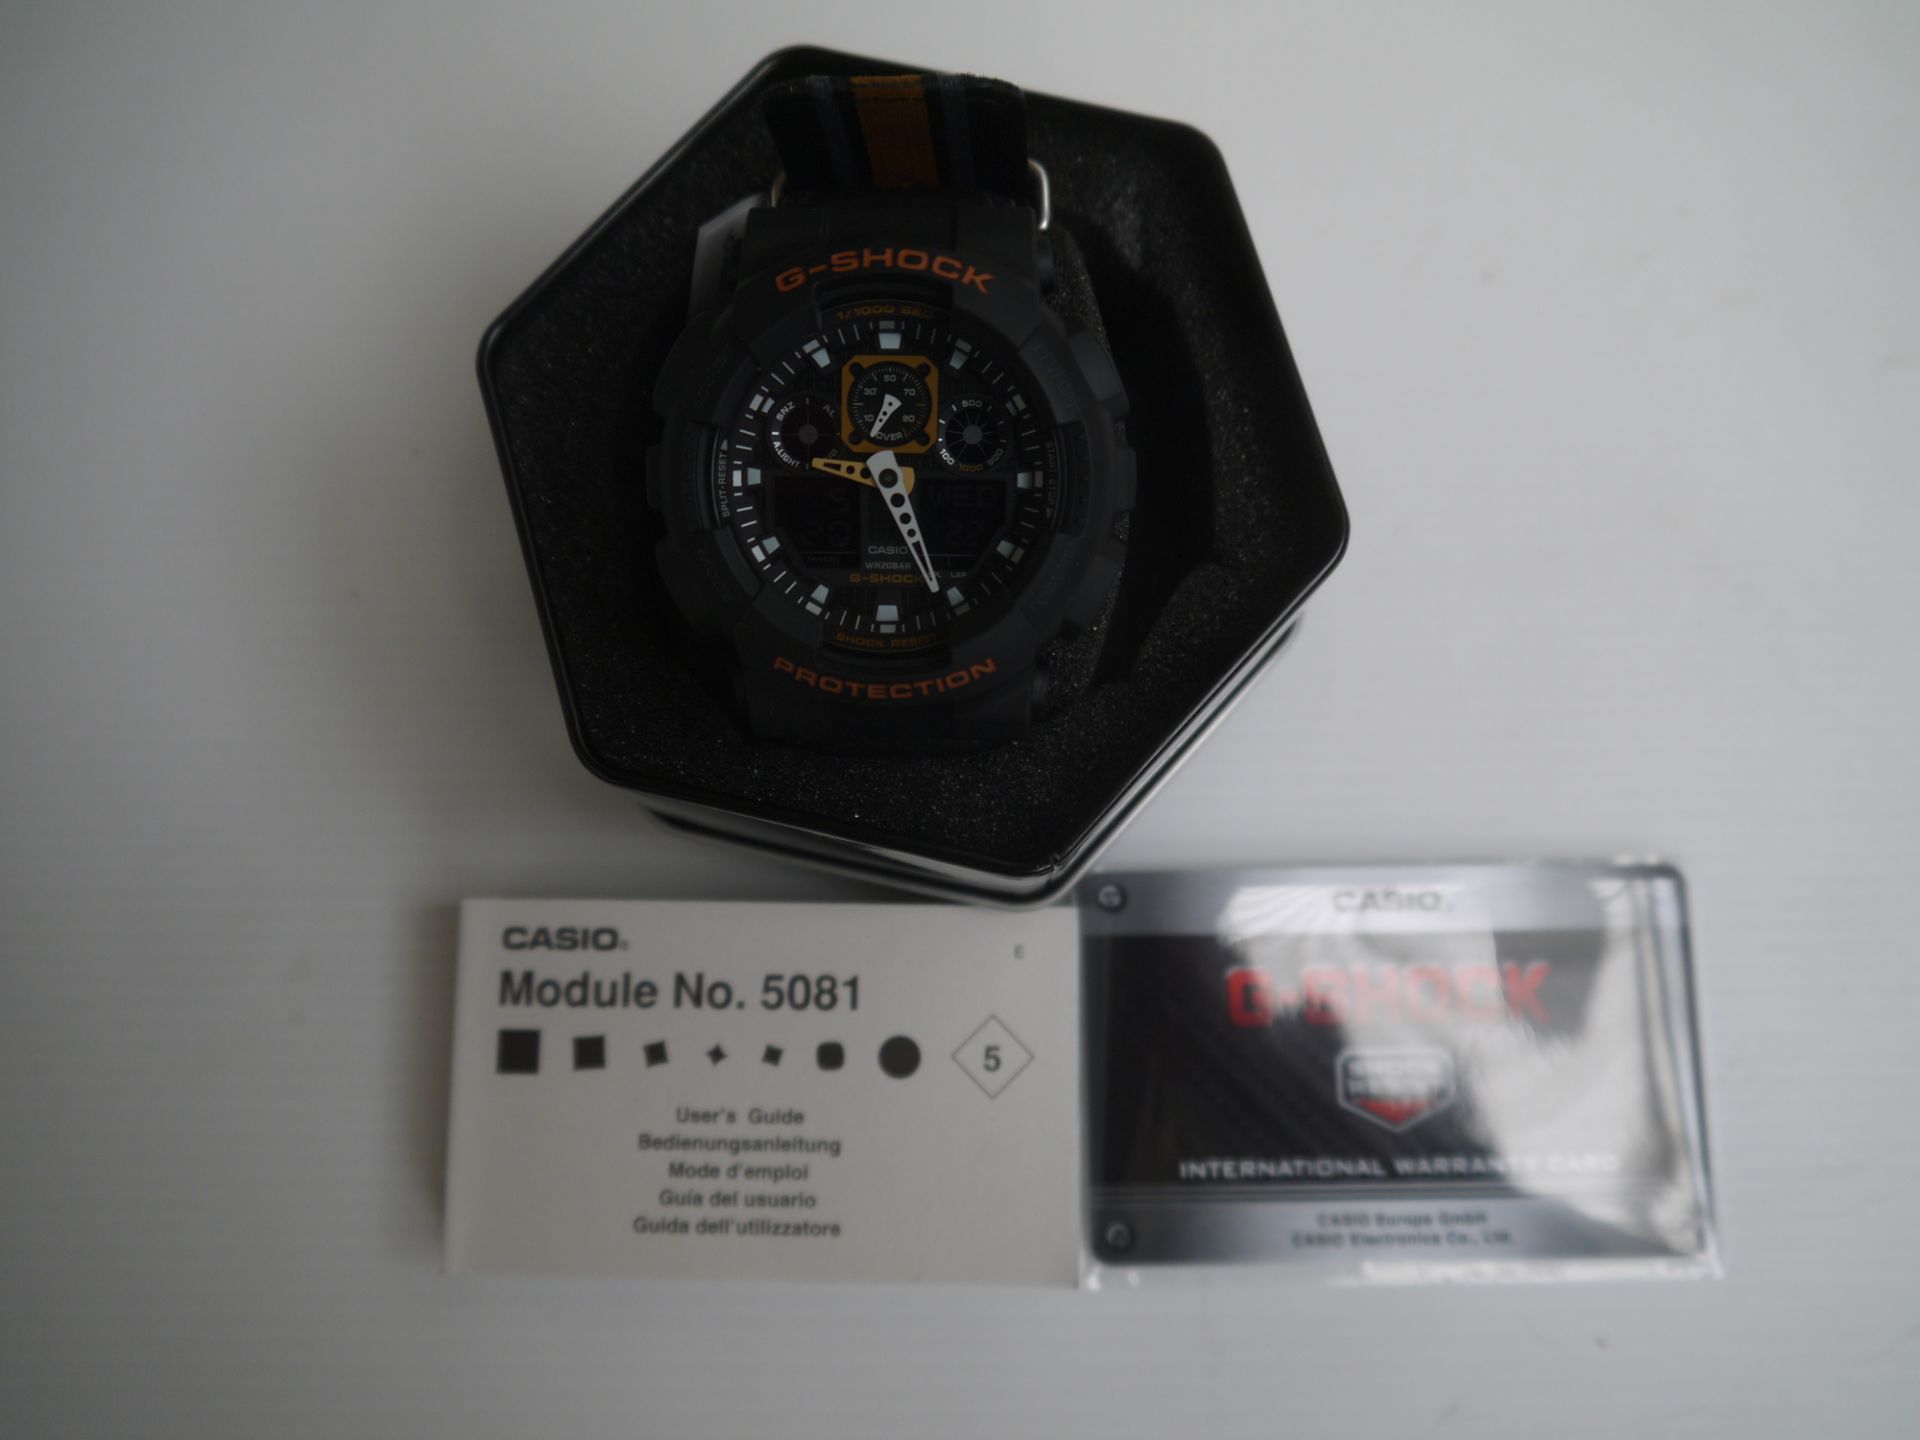 Casio G-Shock 5081 G-Shock  Men's Combi Watch Ga-100-1A4Er with G-Shock Resin Strap new with